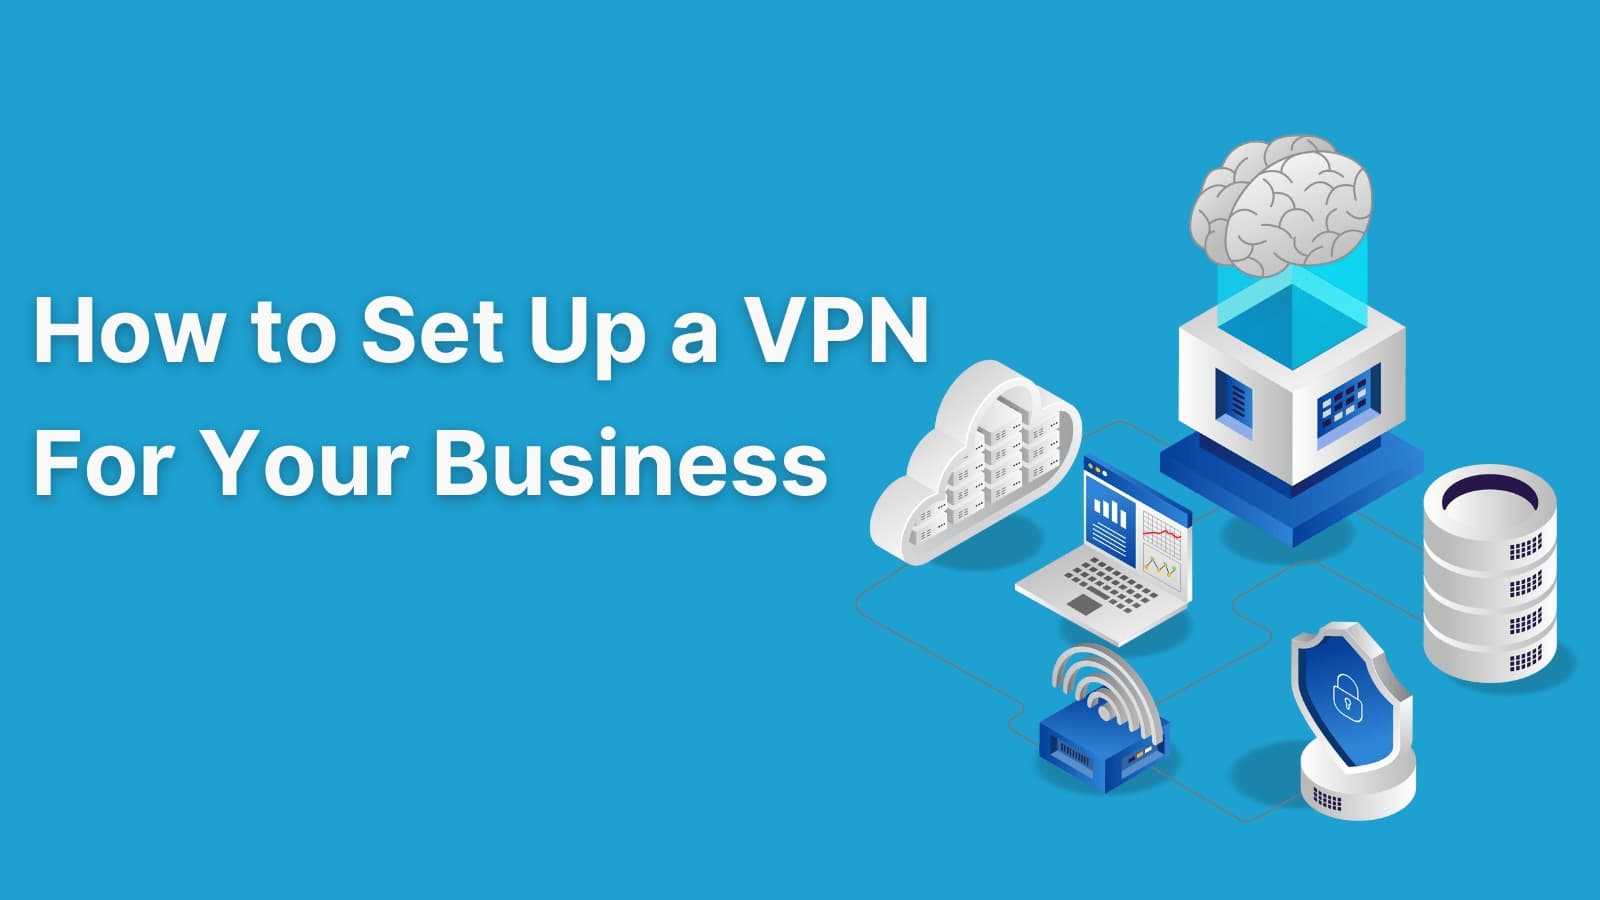 How to Set Up a VPN for Your Business